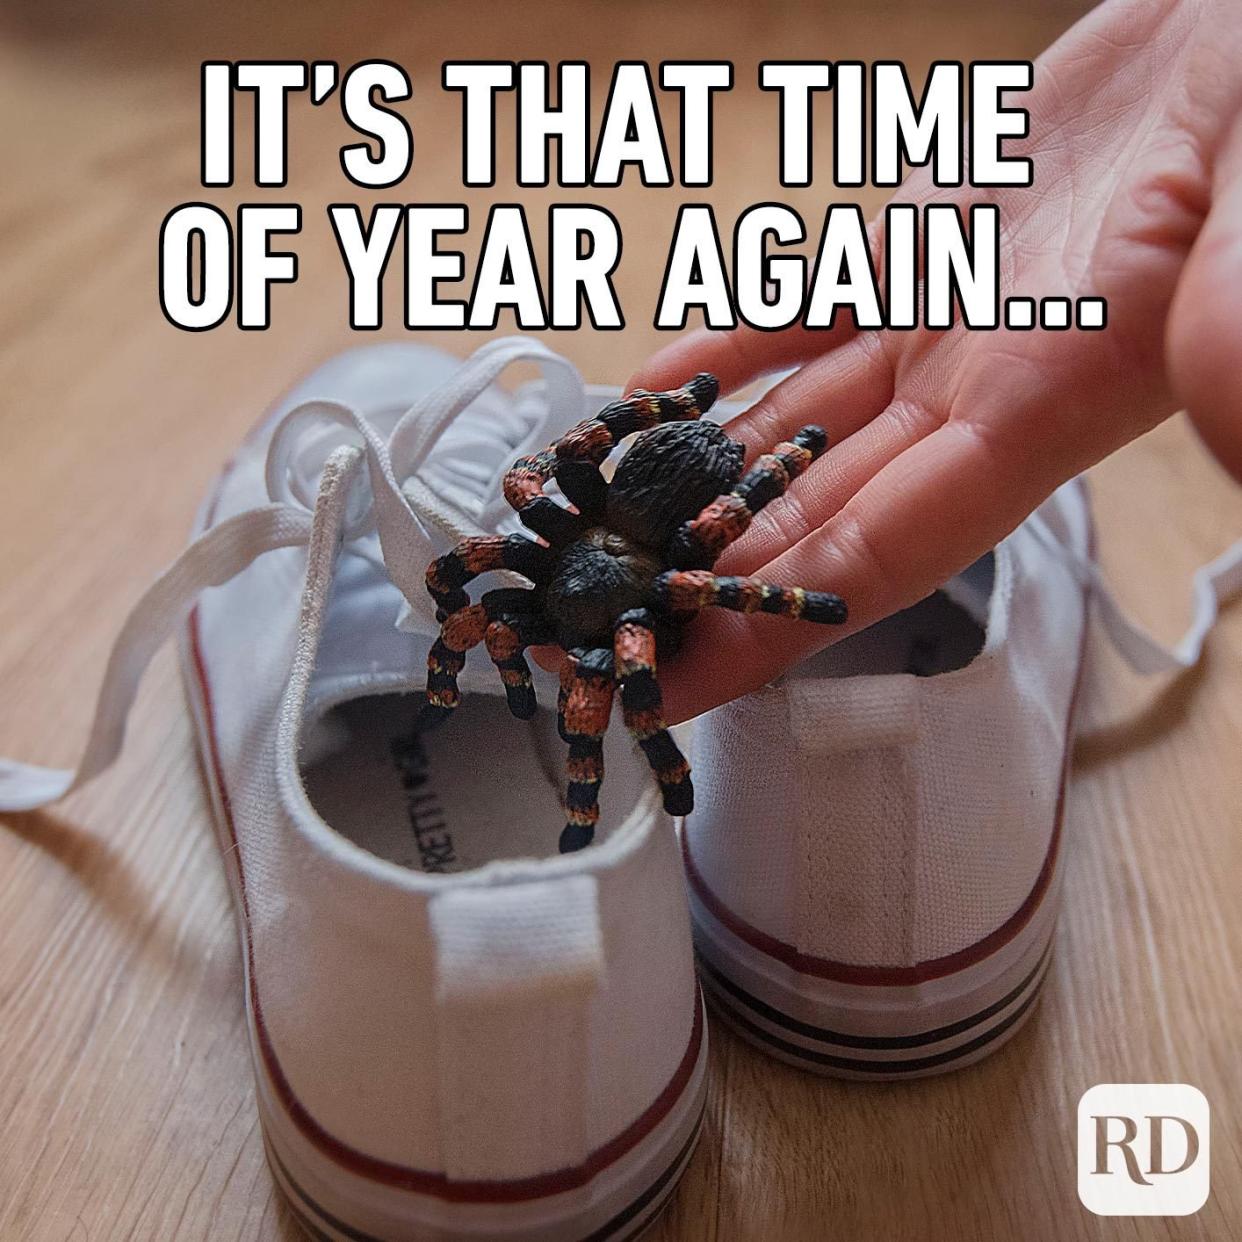 Person slipping a spider into shoes. Meme text: It's that time of year again...